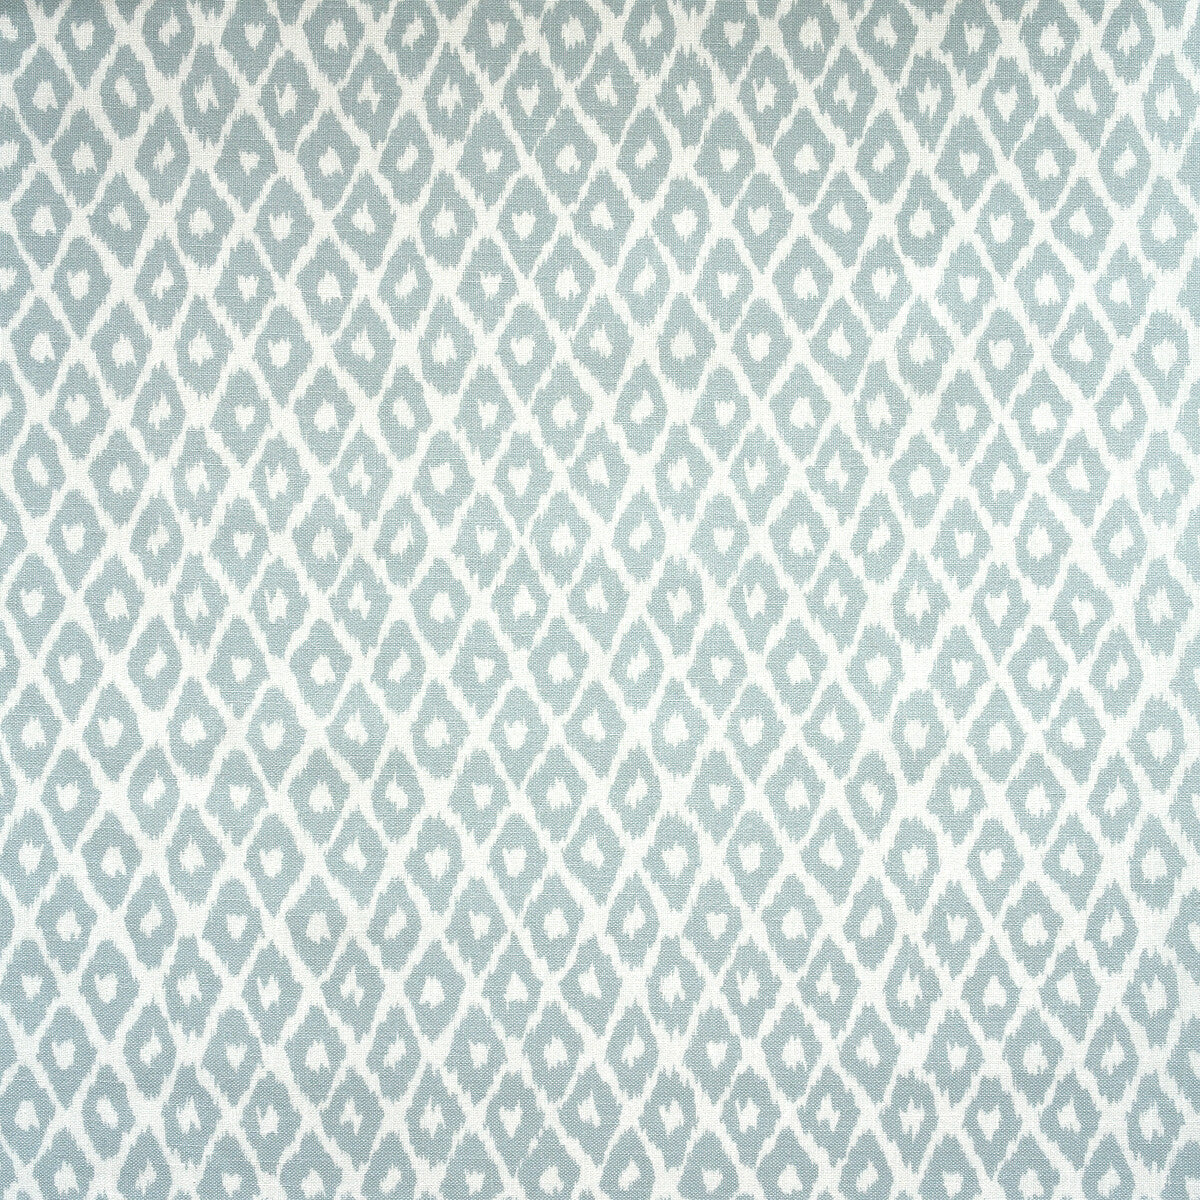 Gypsum Outdoor fabric in ice color - pattern AM100349.15.0 - by Kravet Couture in the Andrew Martin The Great Outdoors collection